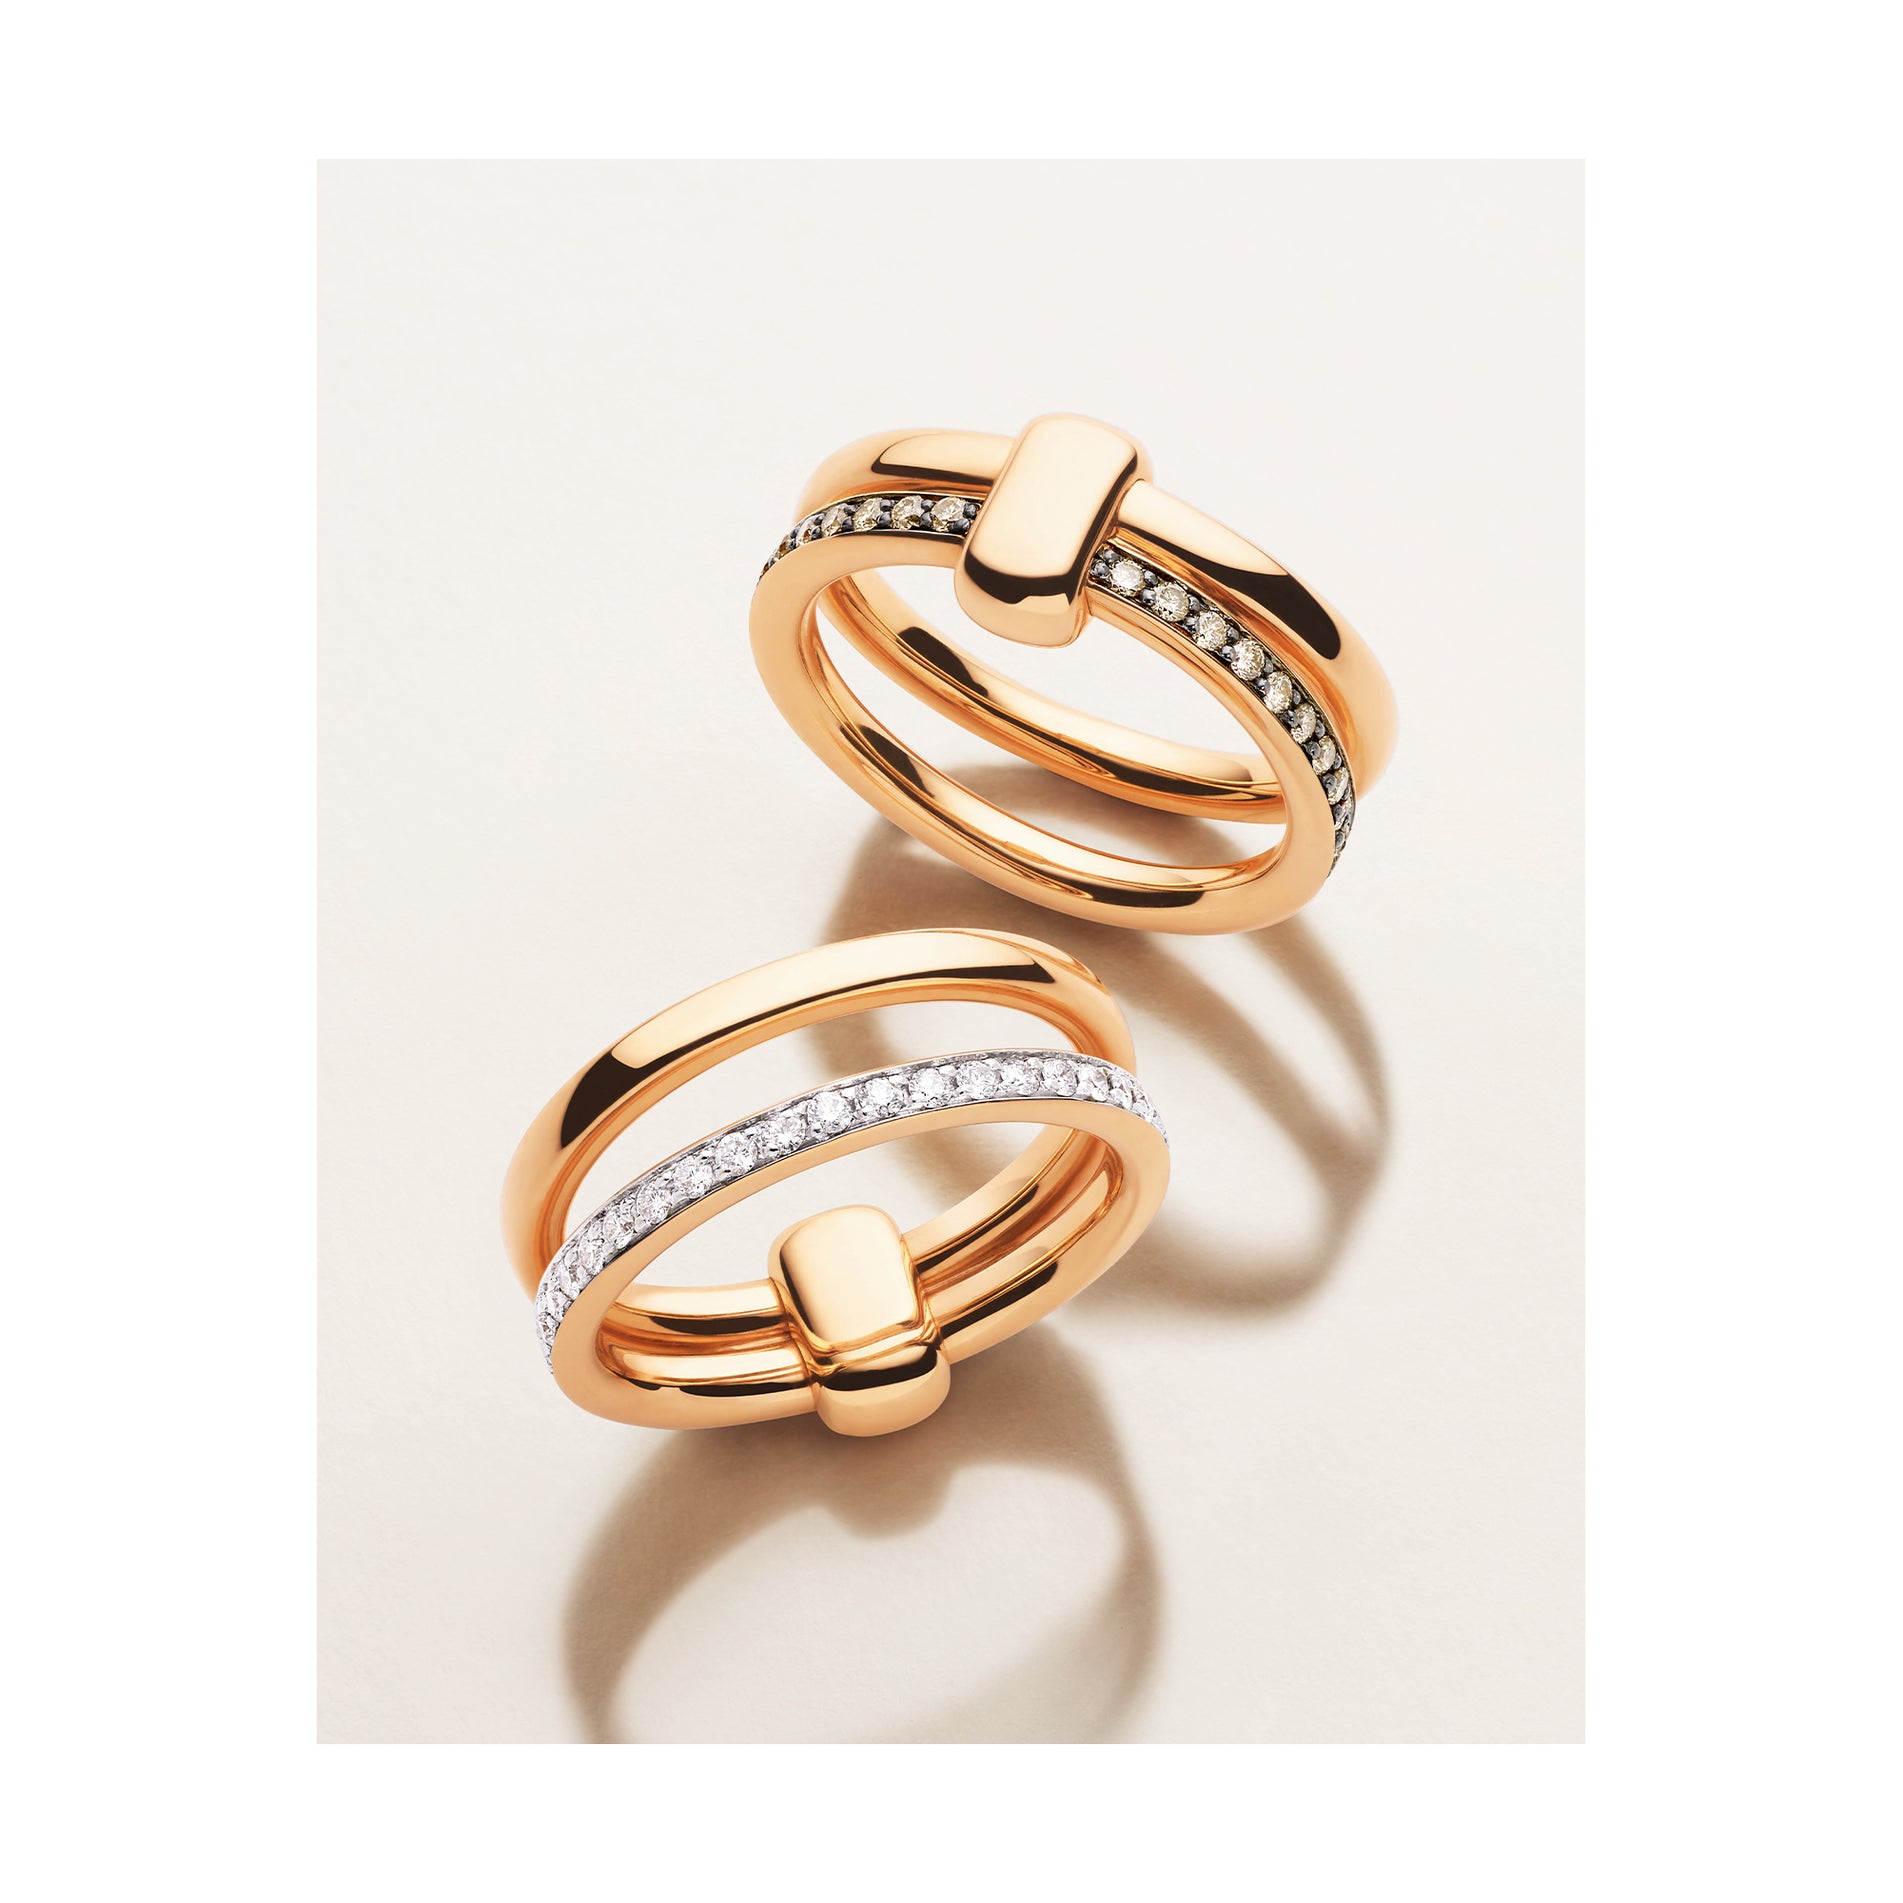 Image of Rings from the Iconica Collection by Designer jewellery Brand Pomellato